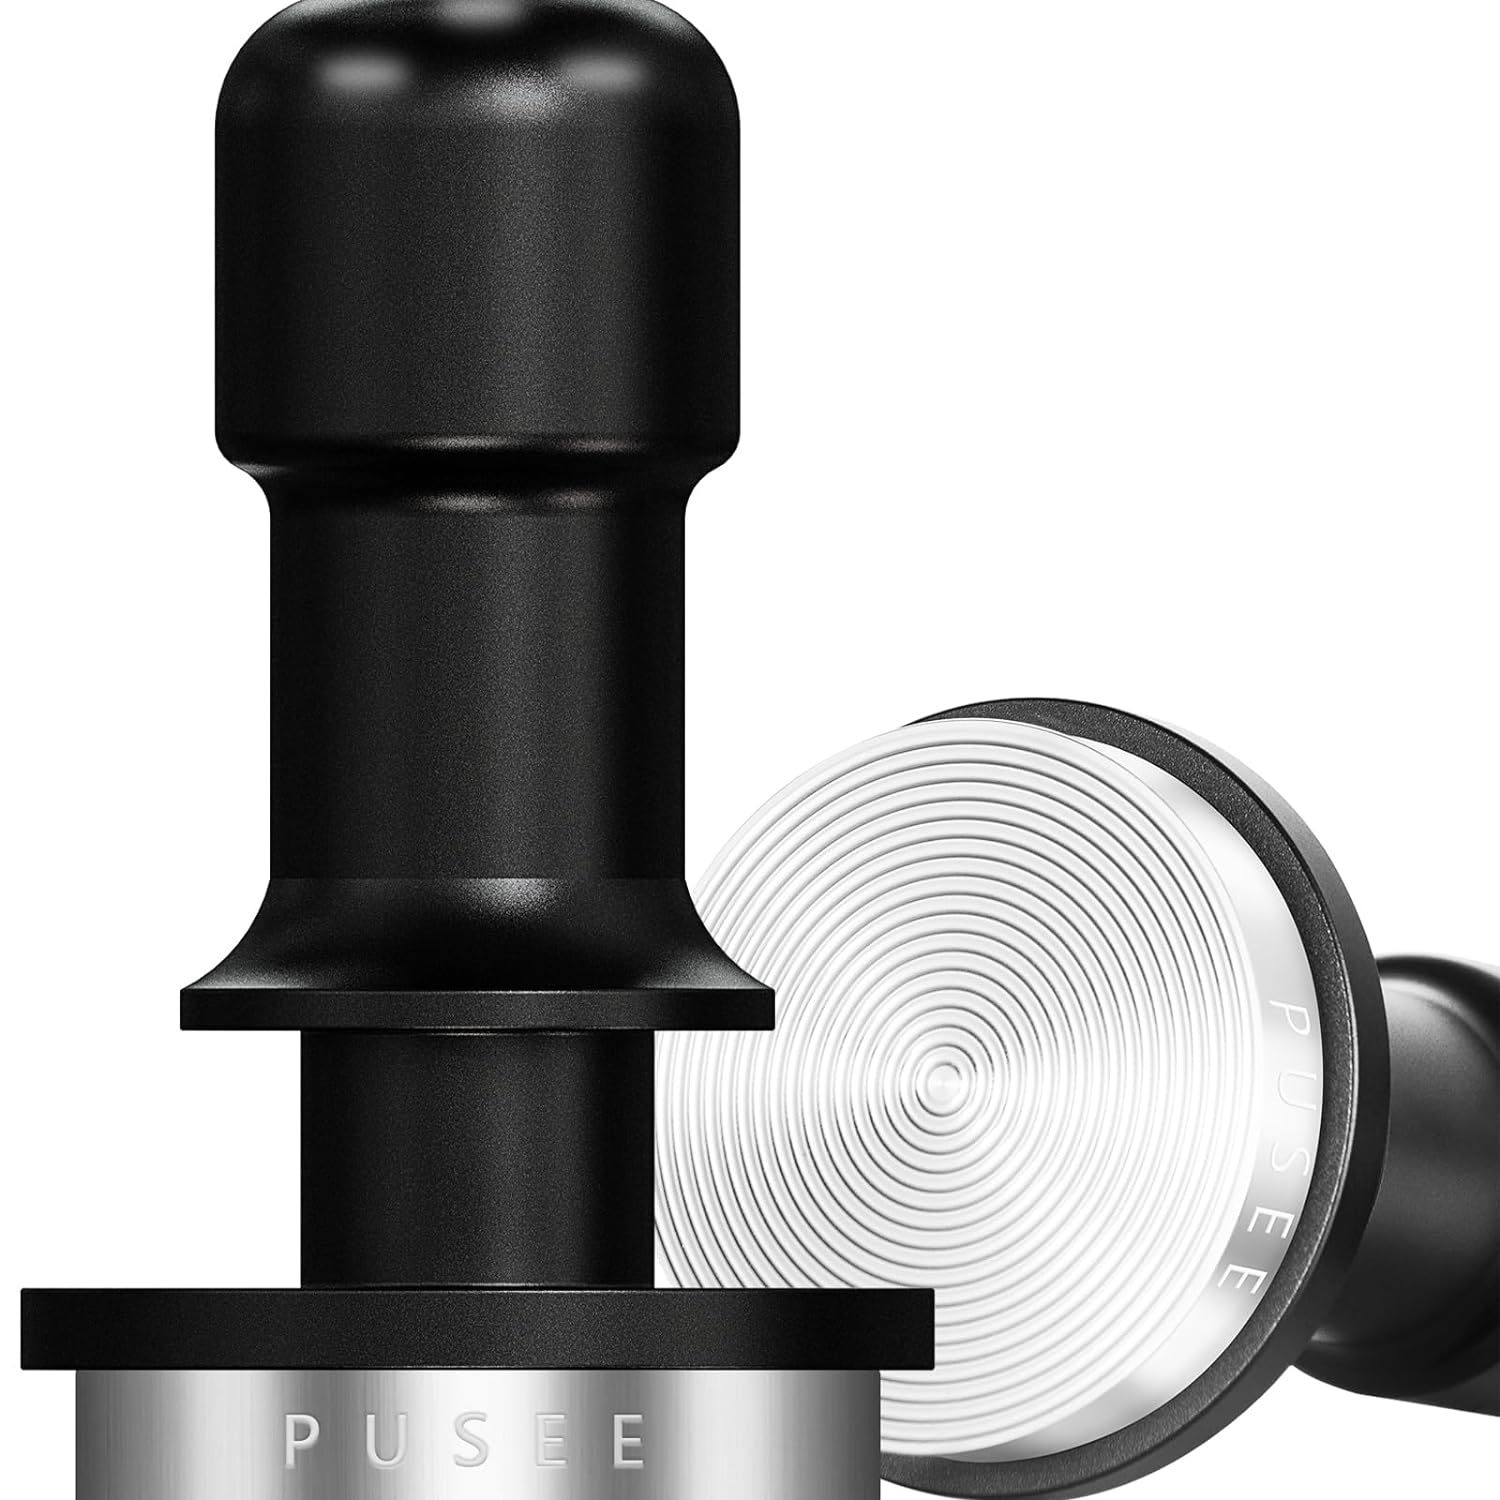 PUSEE 49mm Espresso Tamper,Premium 30lb Calibrated Espresso Tamper Upgrade Coffee Tamper with Spring Loaded,100% Stainless Steel Ground Tamper for Barista Home Coffee Espresso Accessories